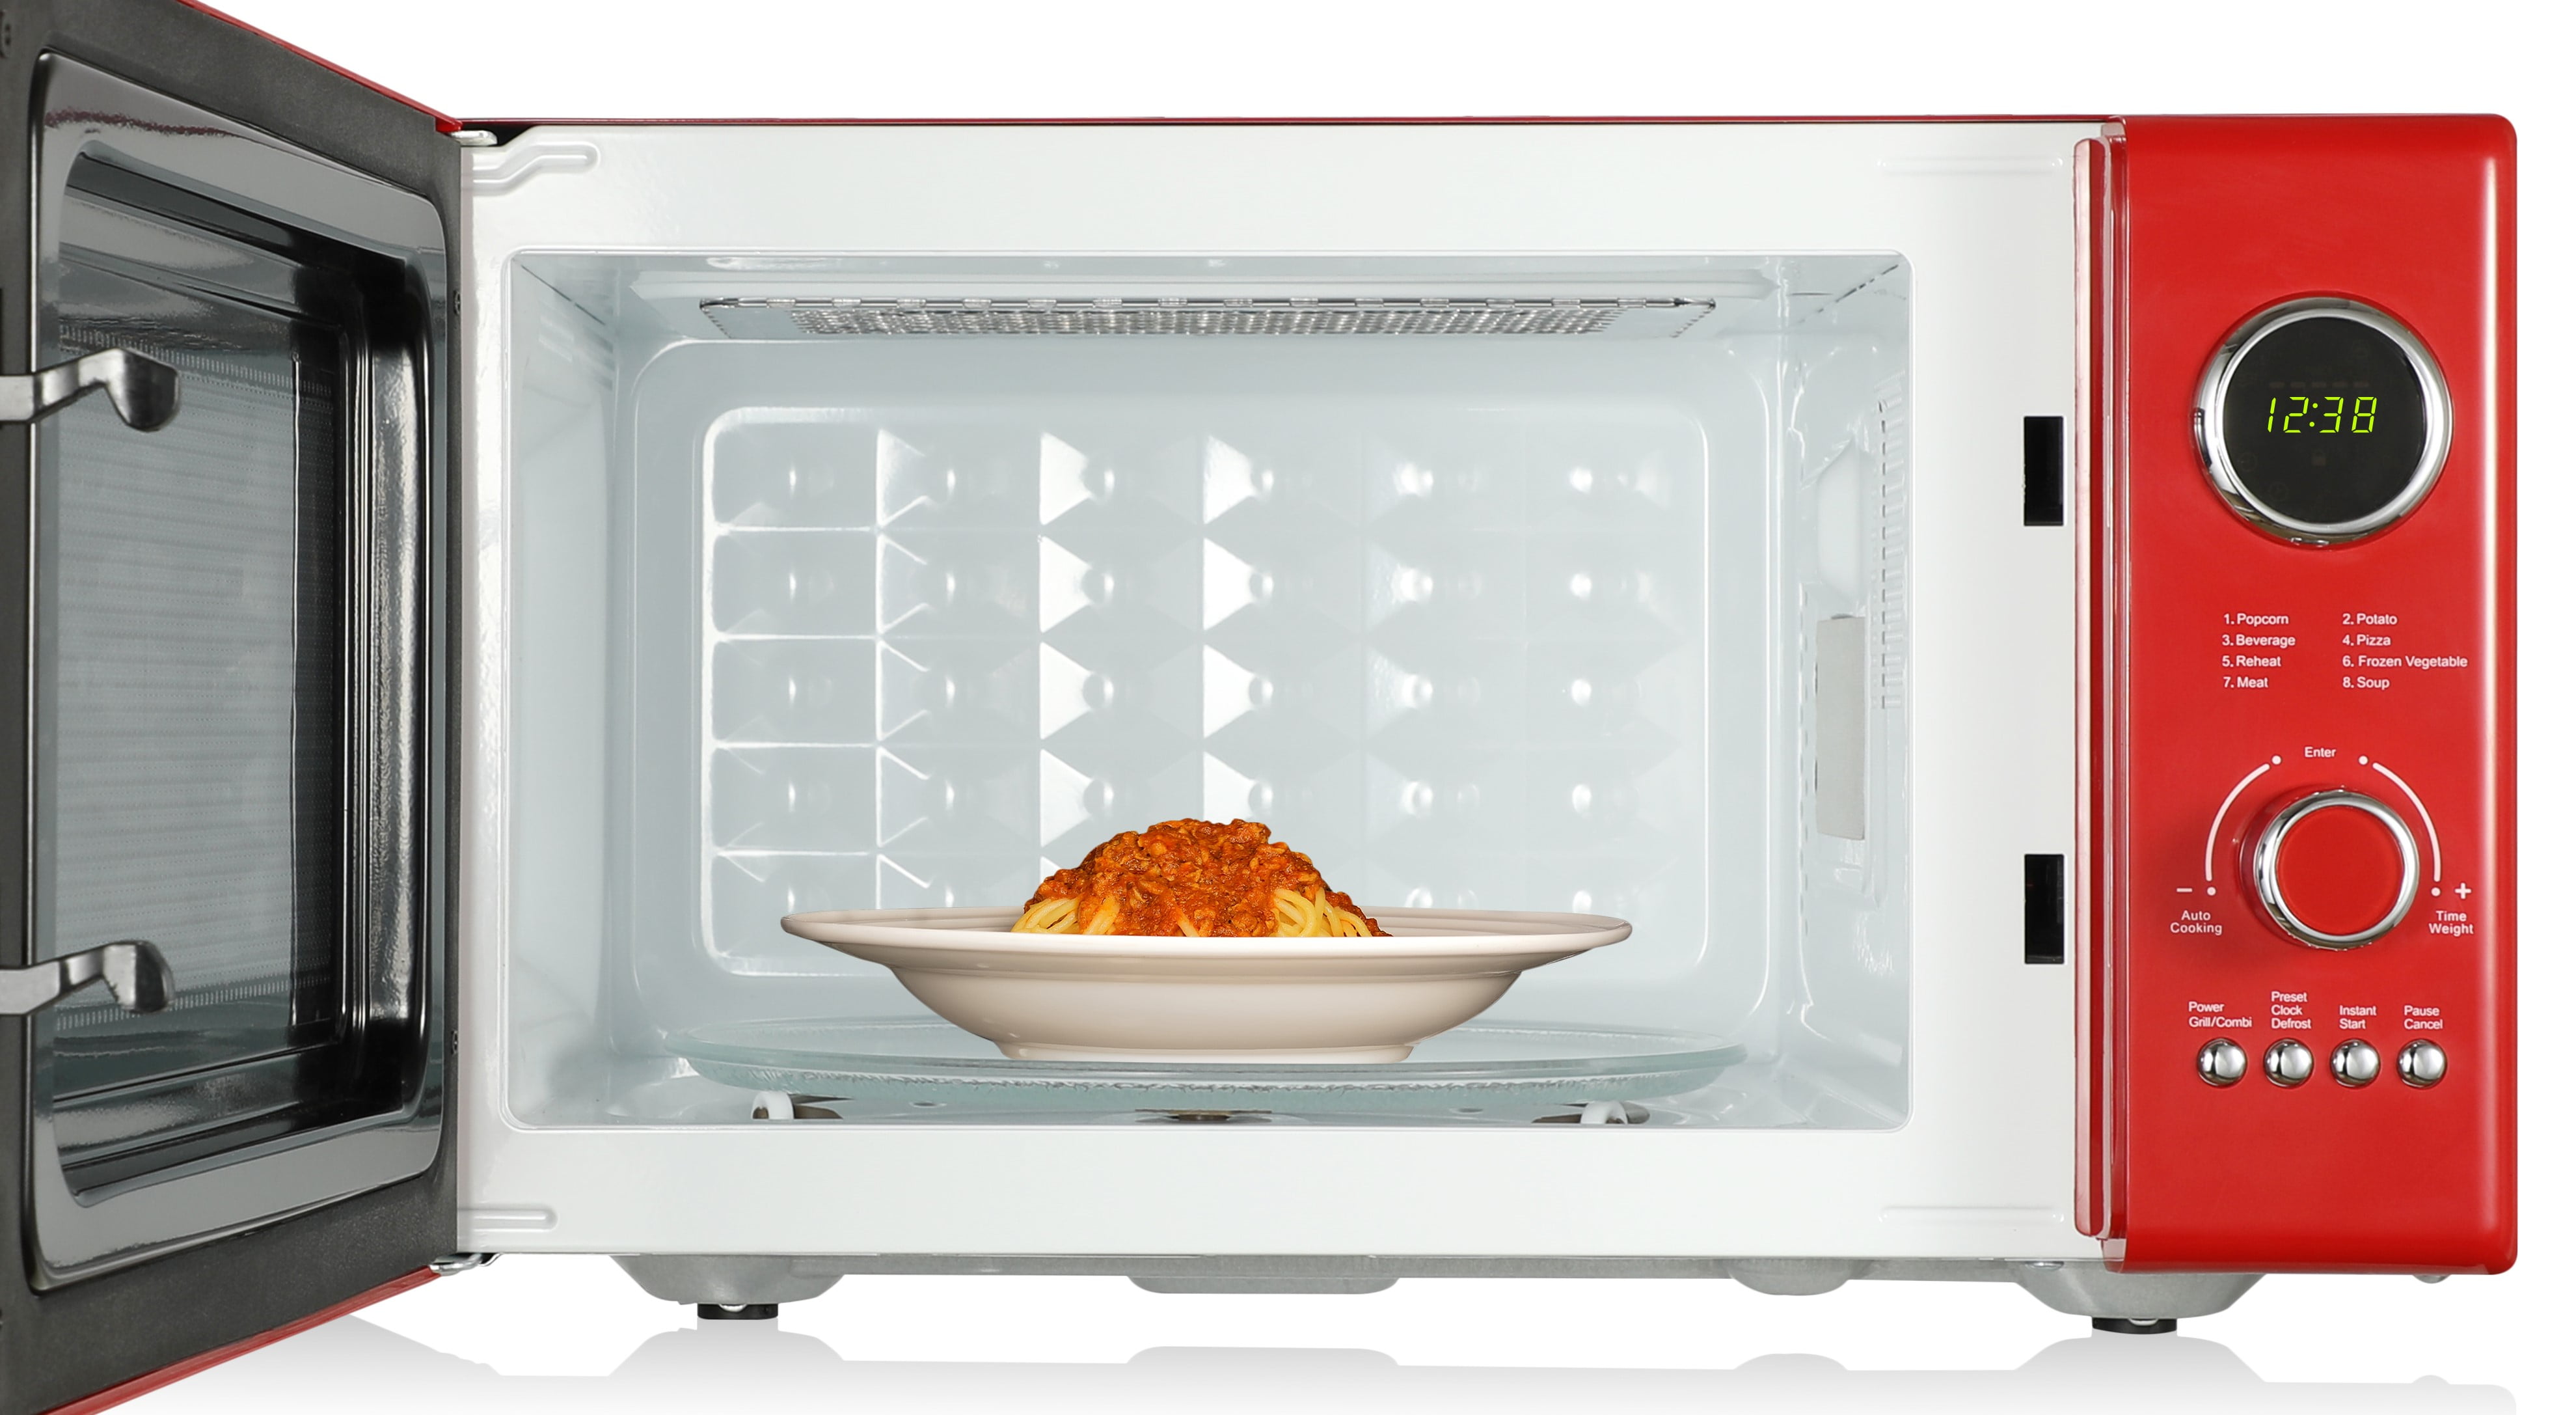 Emerson 0.9 Cubic Foot Microwave Oven, 1 Count - Fred Meyer